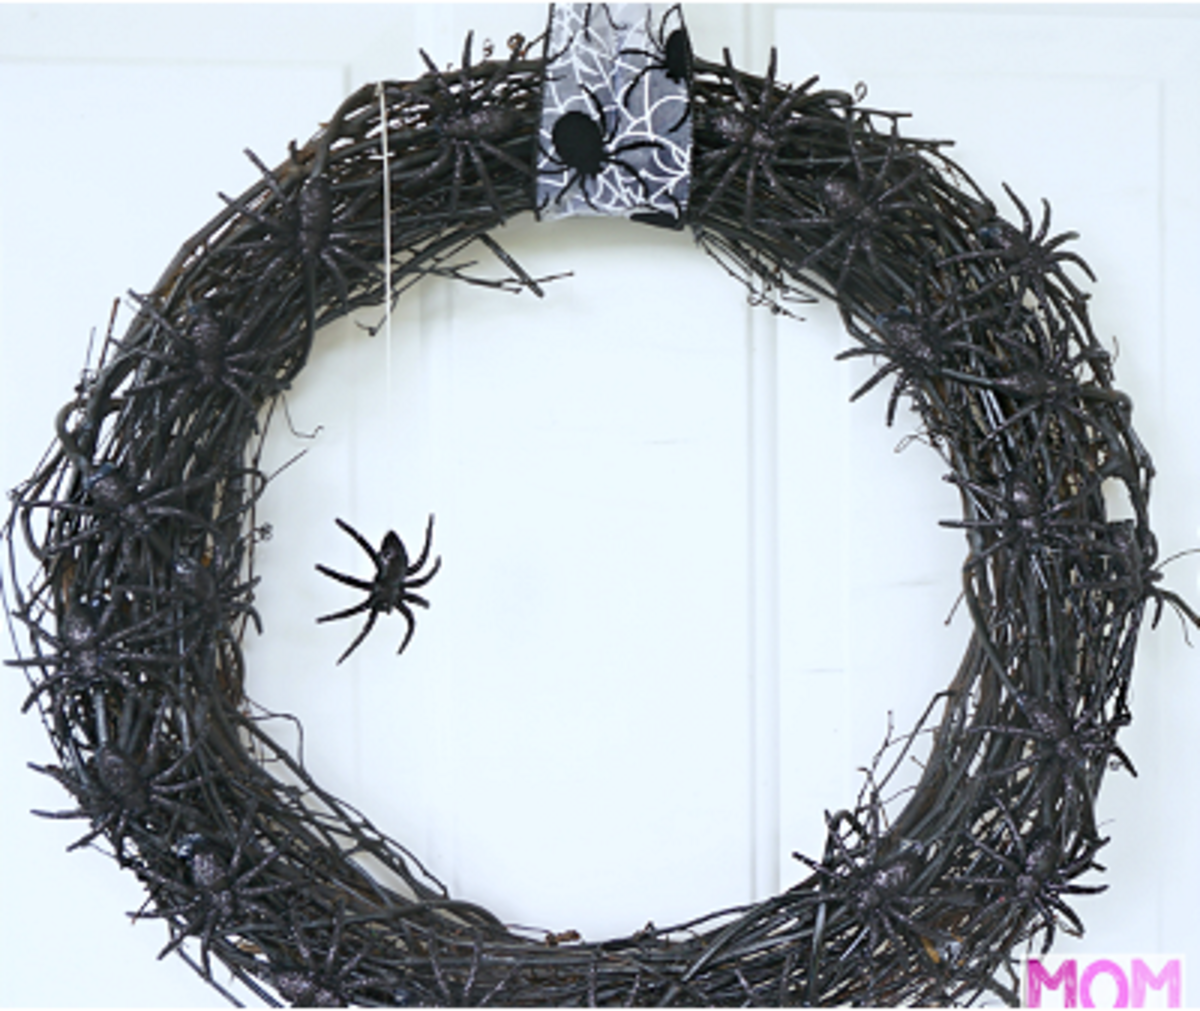 Here's another take on a spooky wreath. This one is covered with spiders.